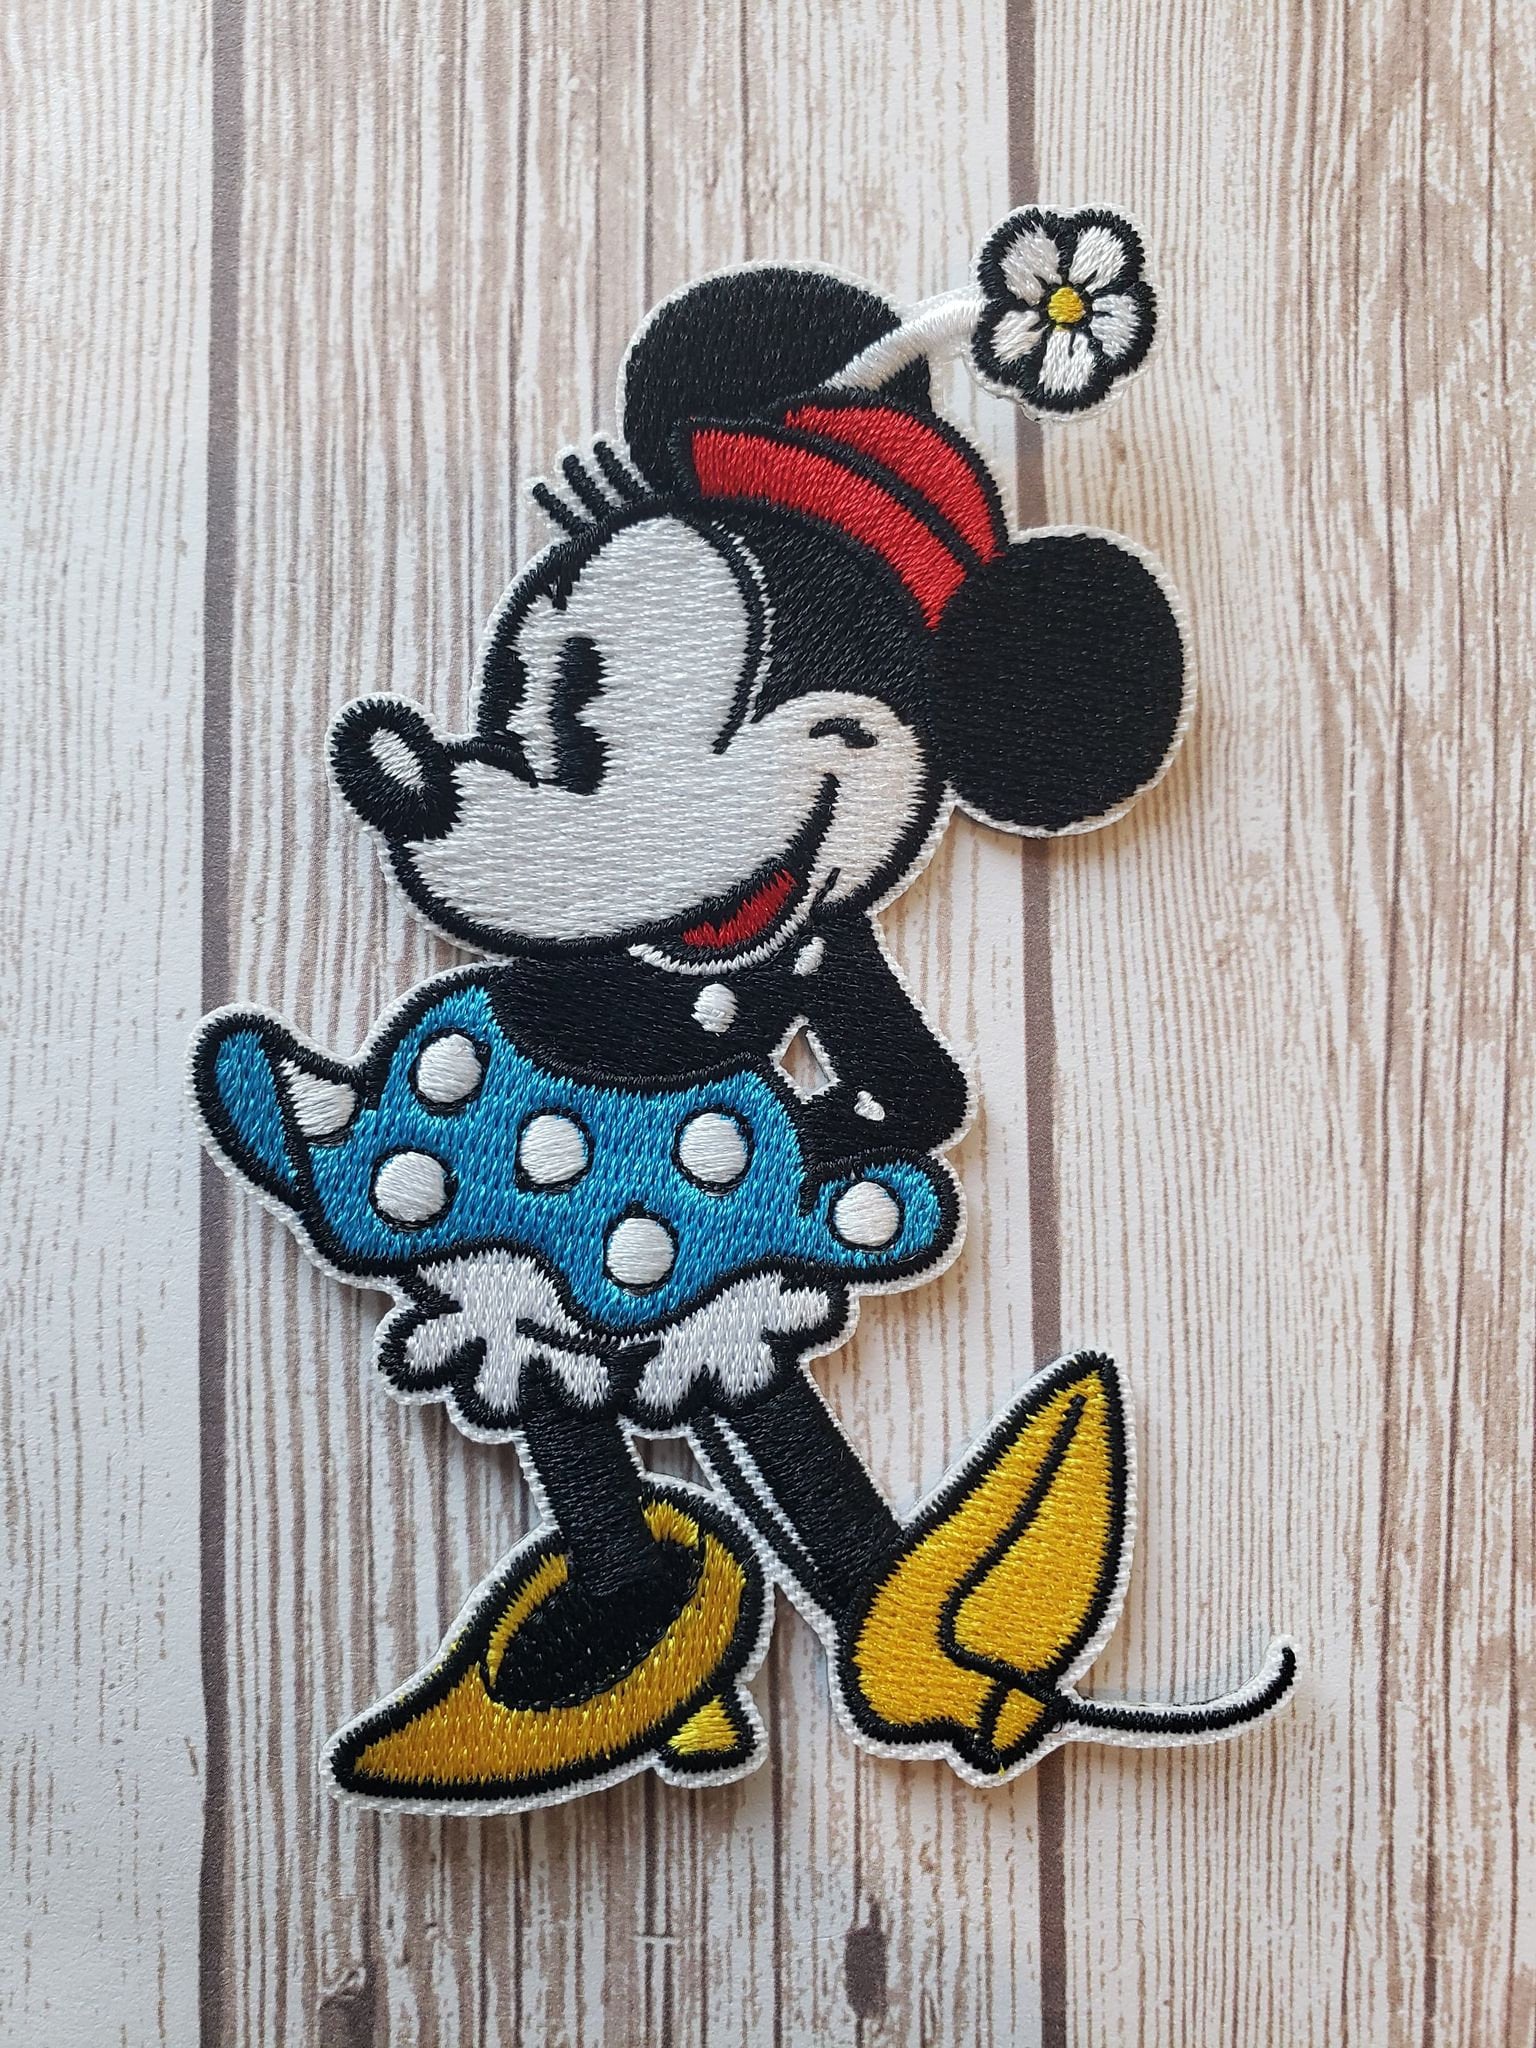 Minnie Mouse Heart Shades Iron on Applique Disney Fan DIY Decoration Craft Patch